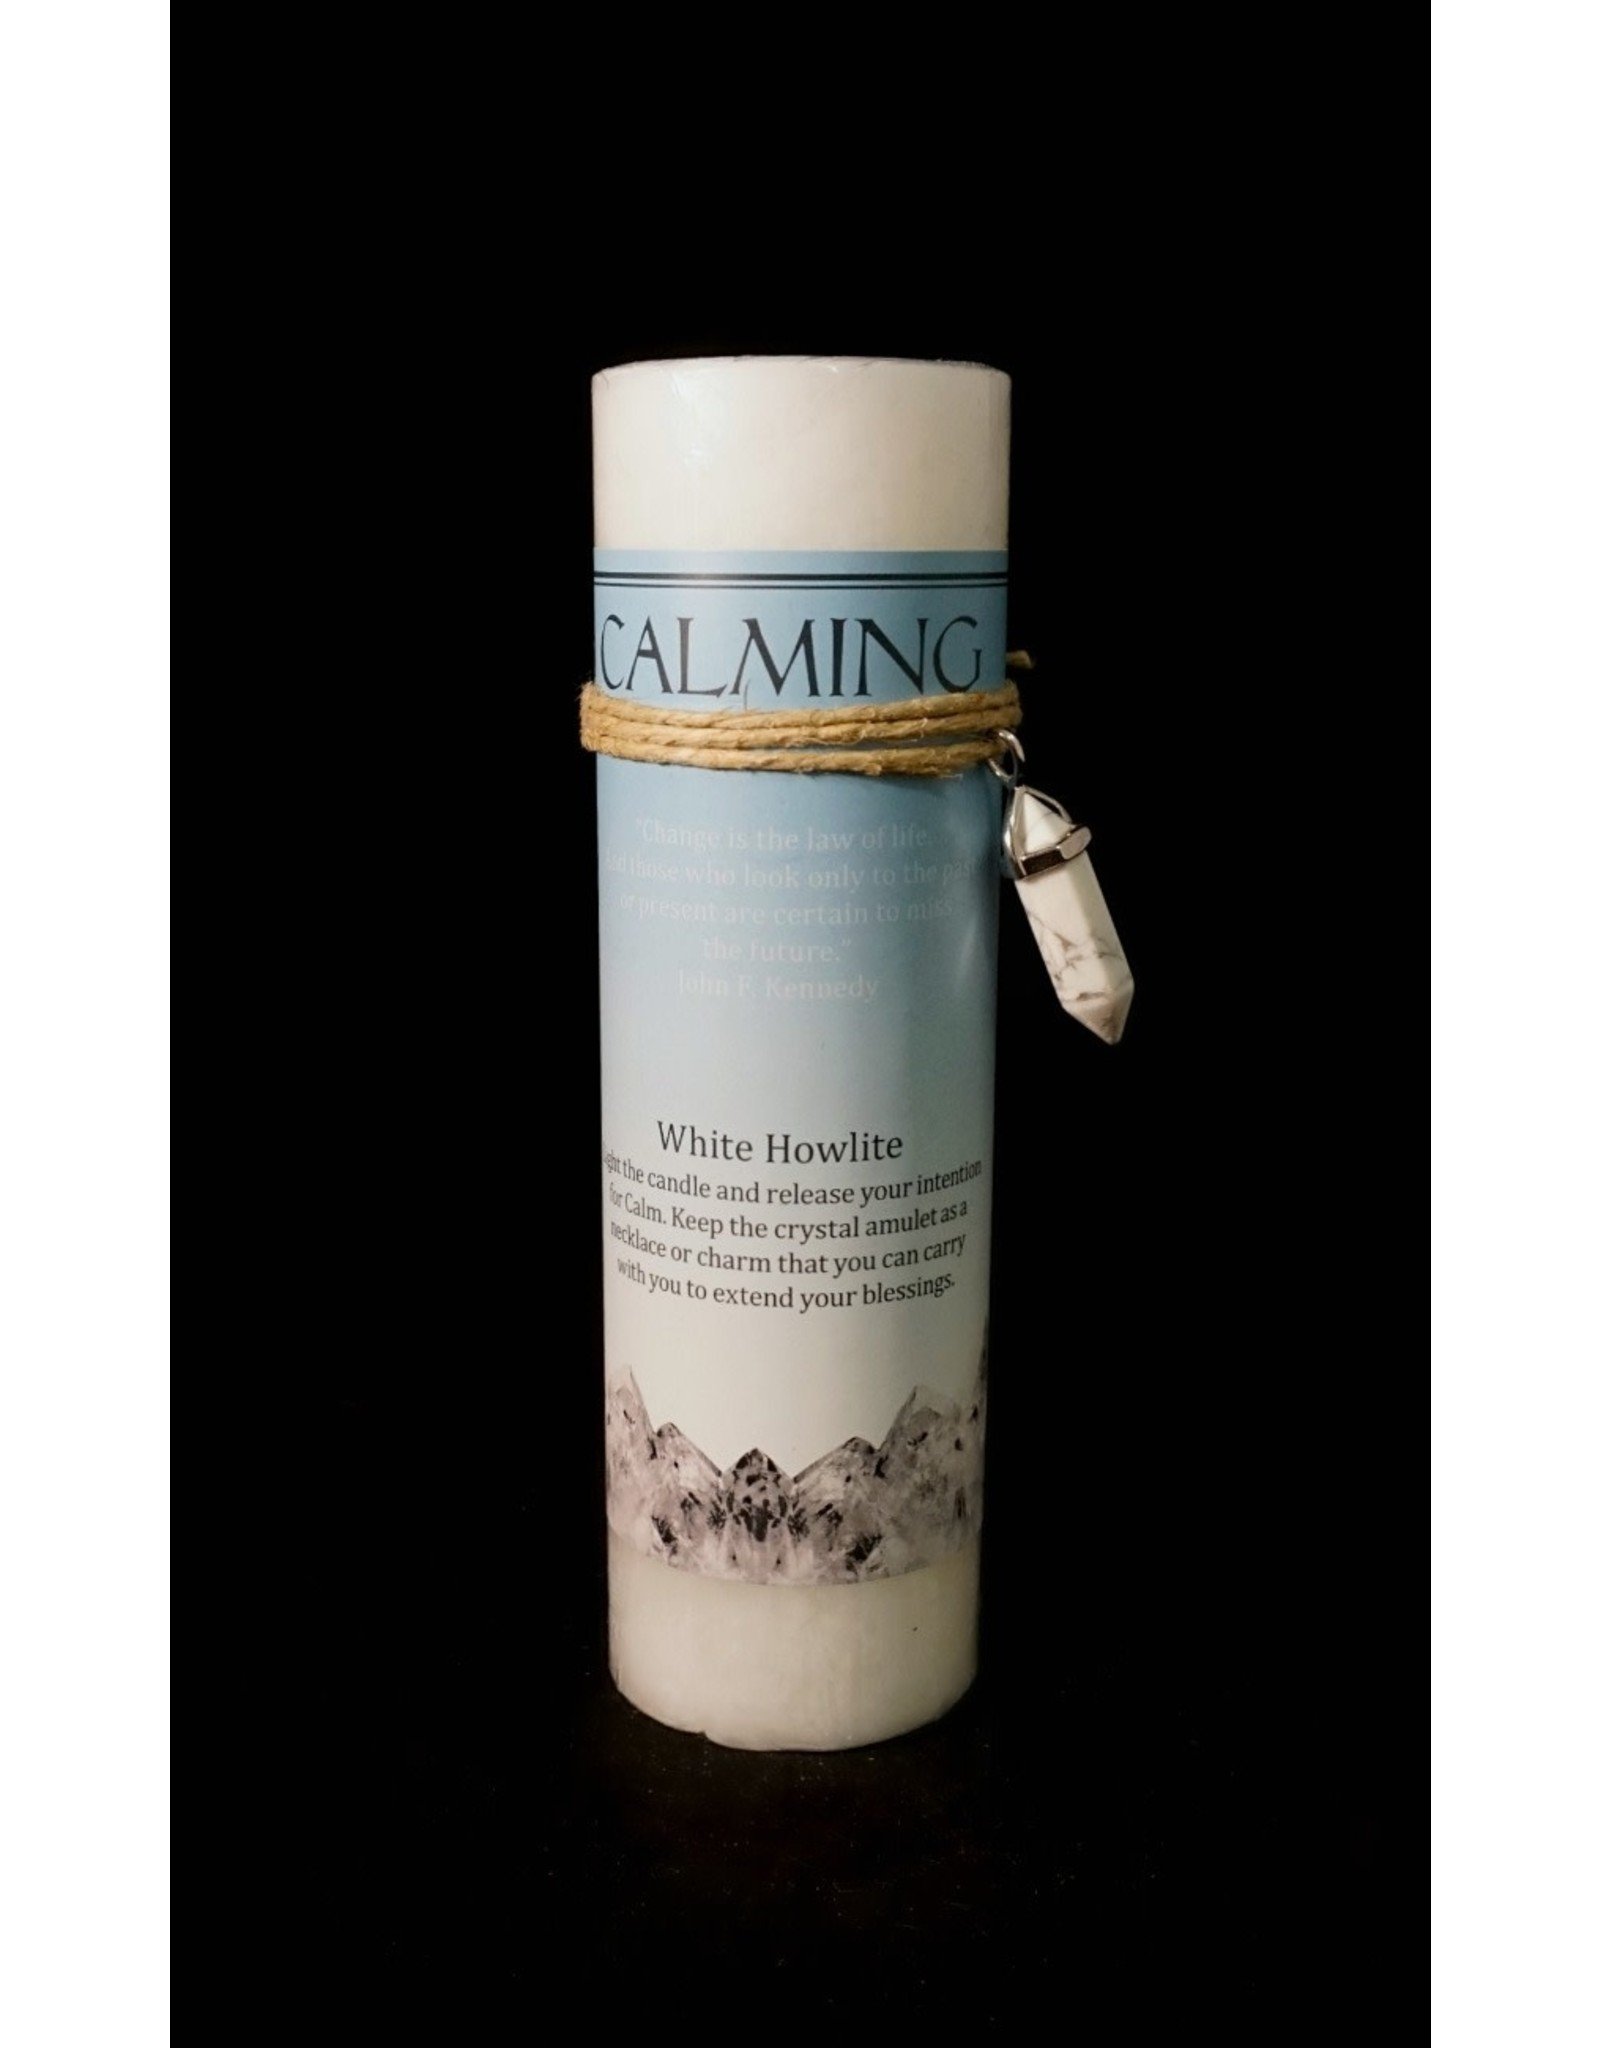 Crystal Energy Pendant Candle - White Howlite Calming